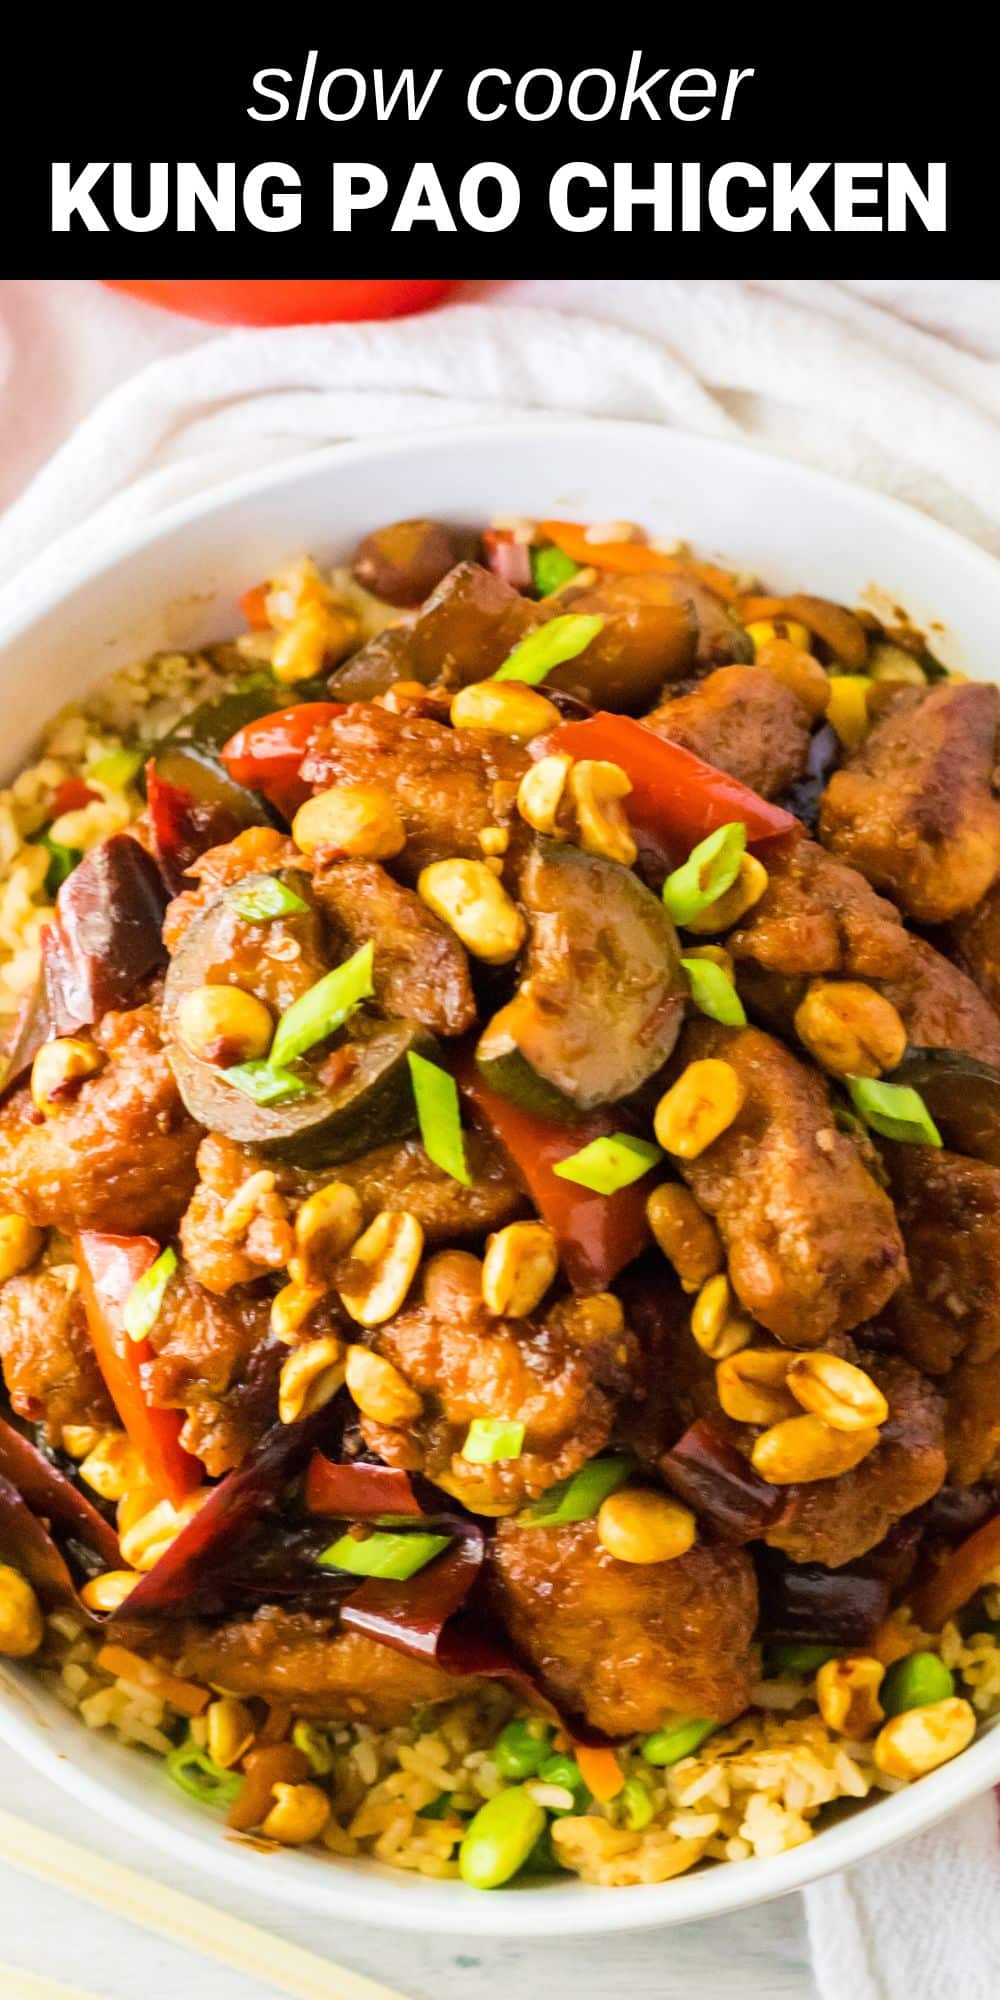 This slow cooker Kung Pao chicken tastes like something you’d get at your favorite Chinese restaurant, and making it is almost as easy as ordering takeout! This bold and flavorful meal is sure to be a new family favorite.